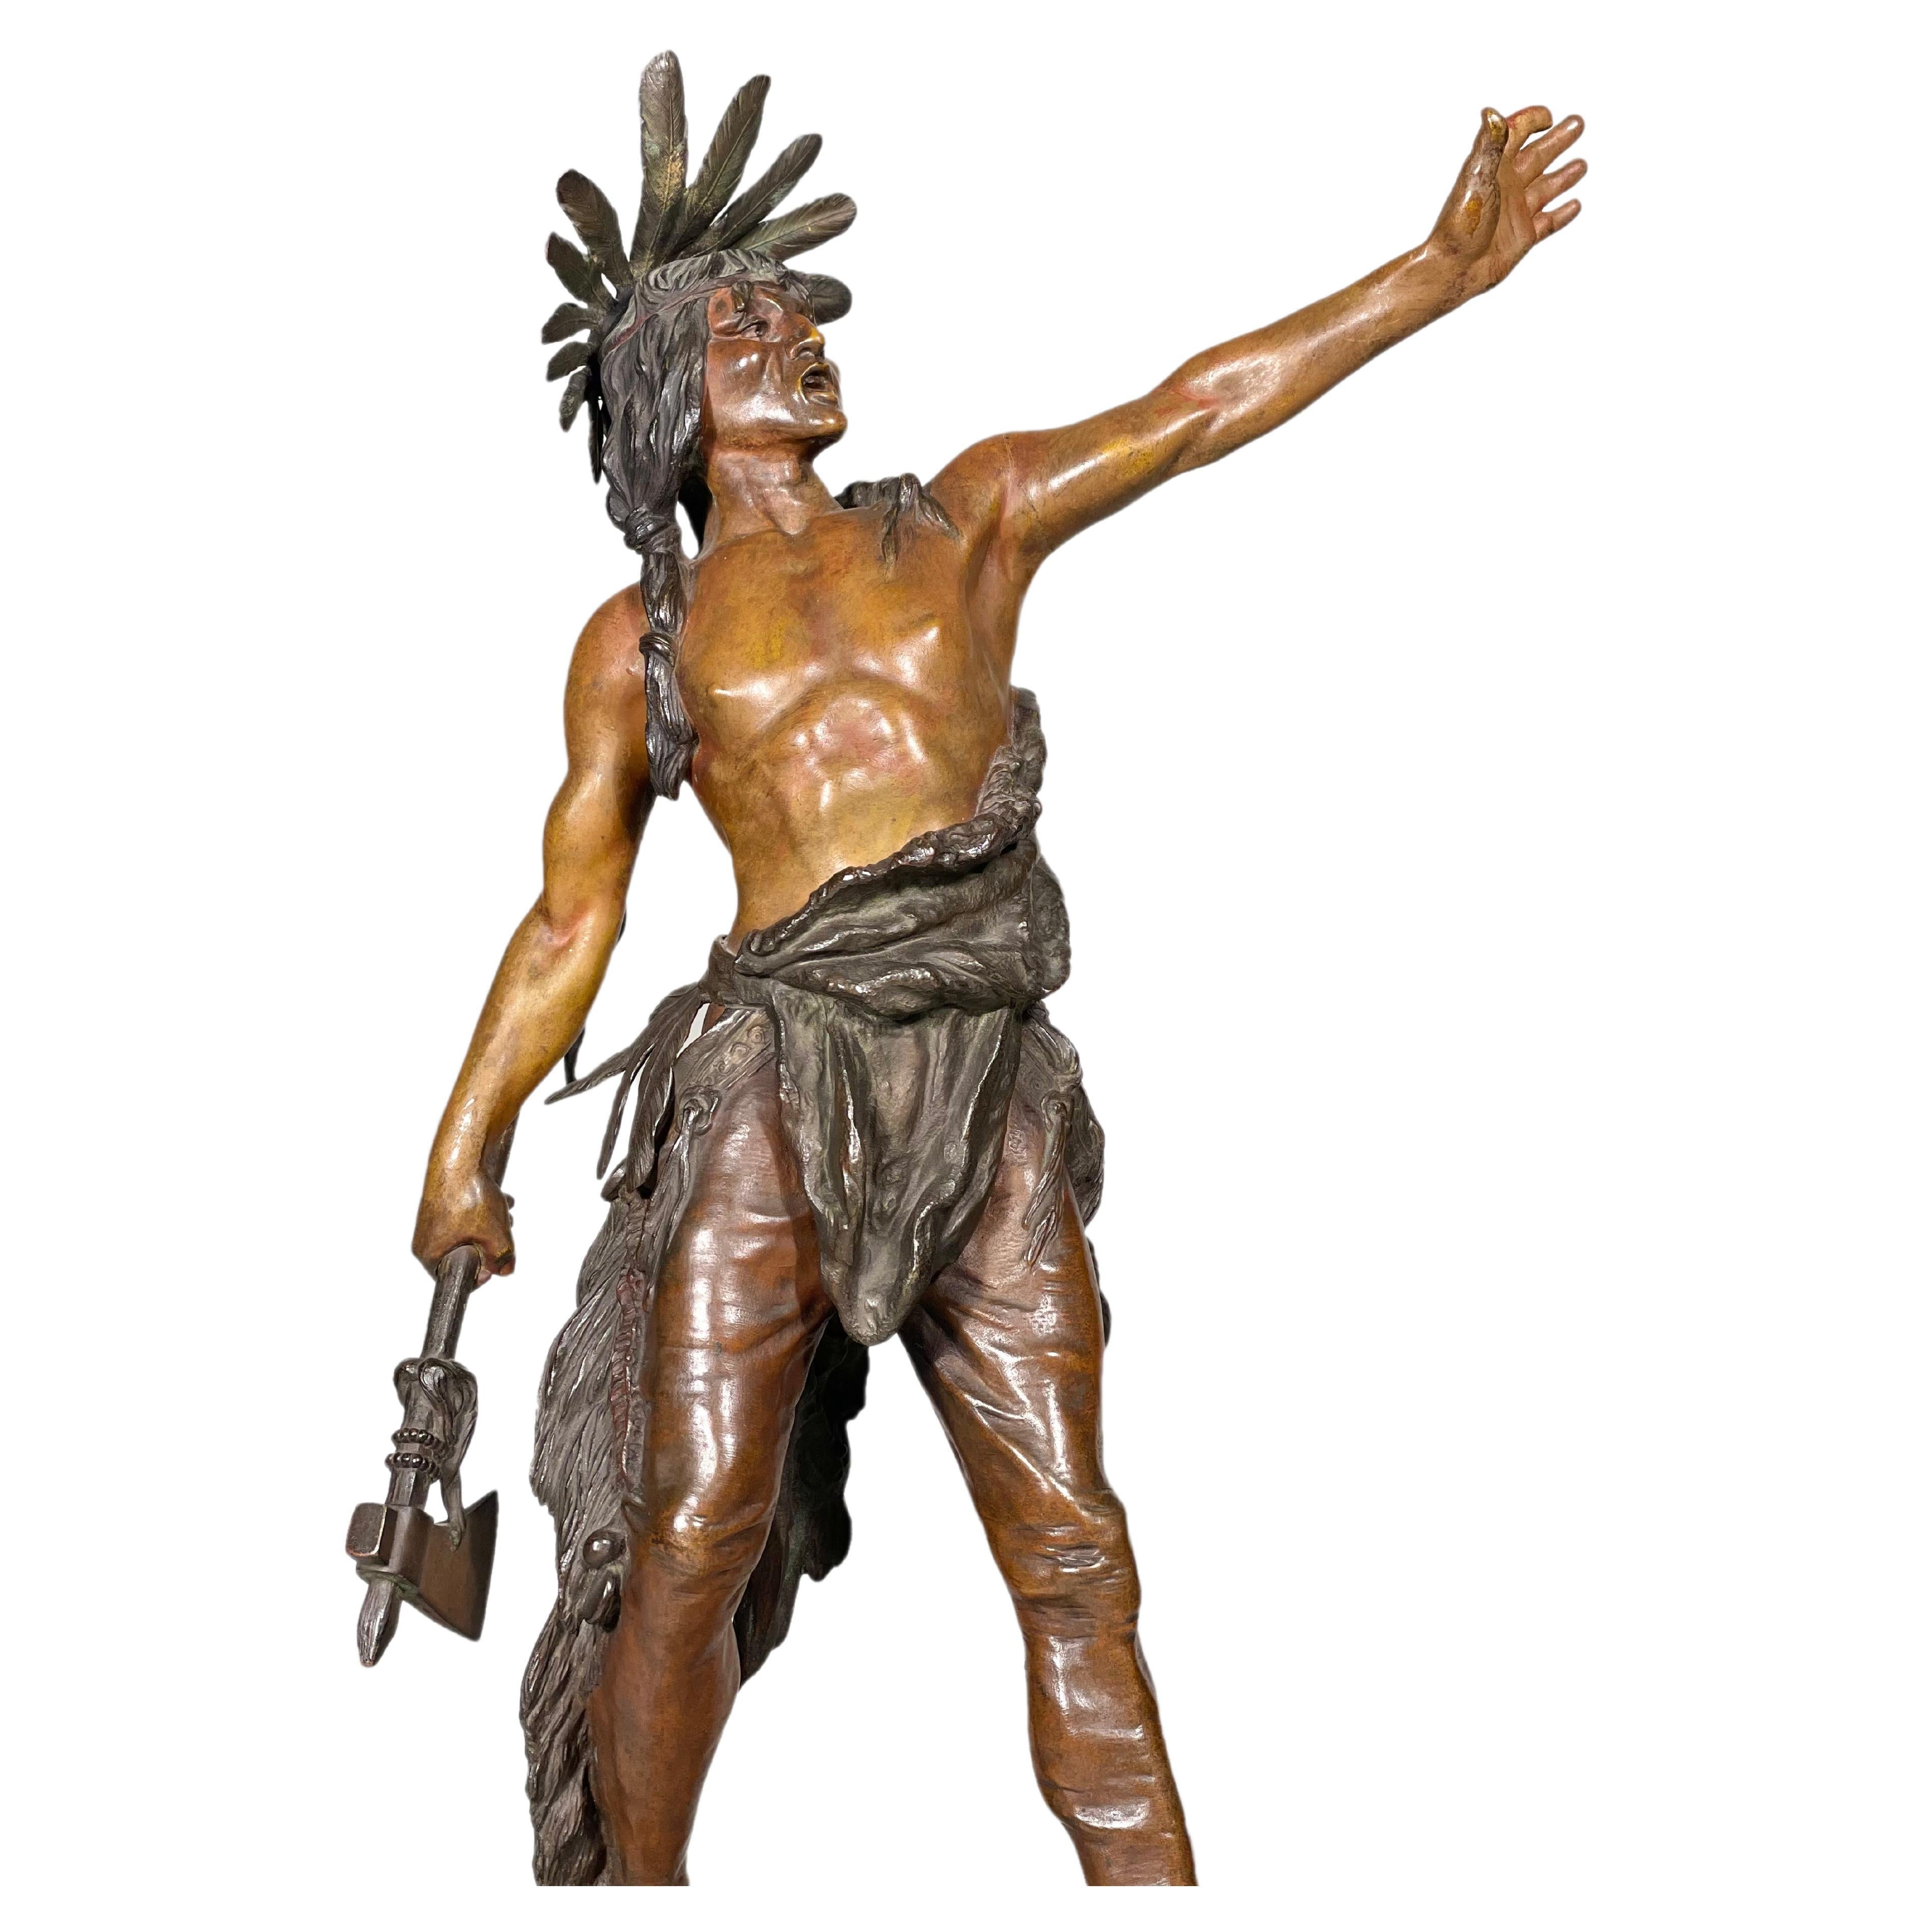 Native American Indian Warrior Sculpture Attributed to Carl Kauba